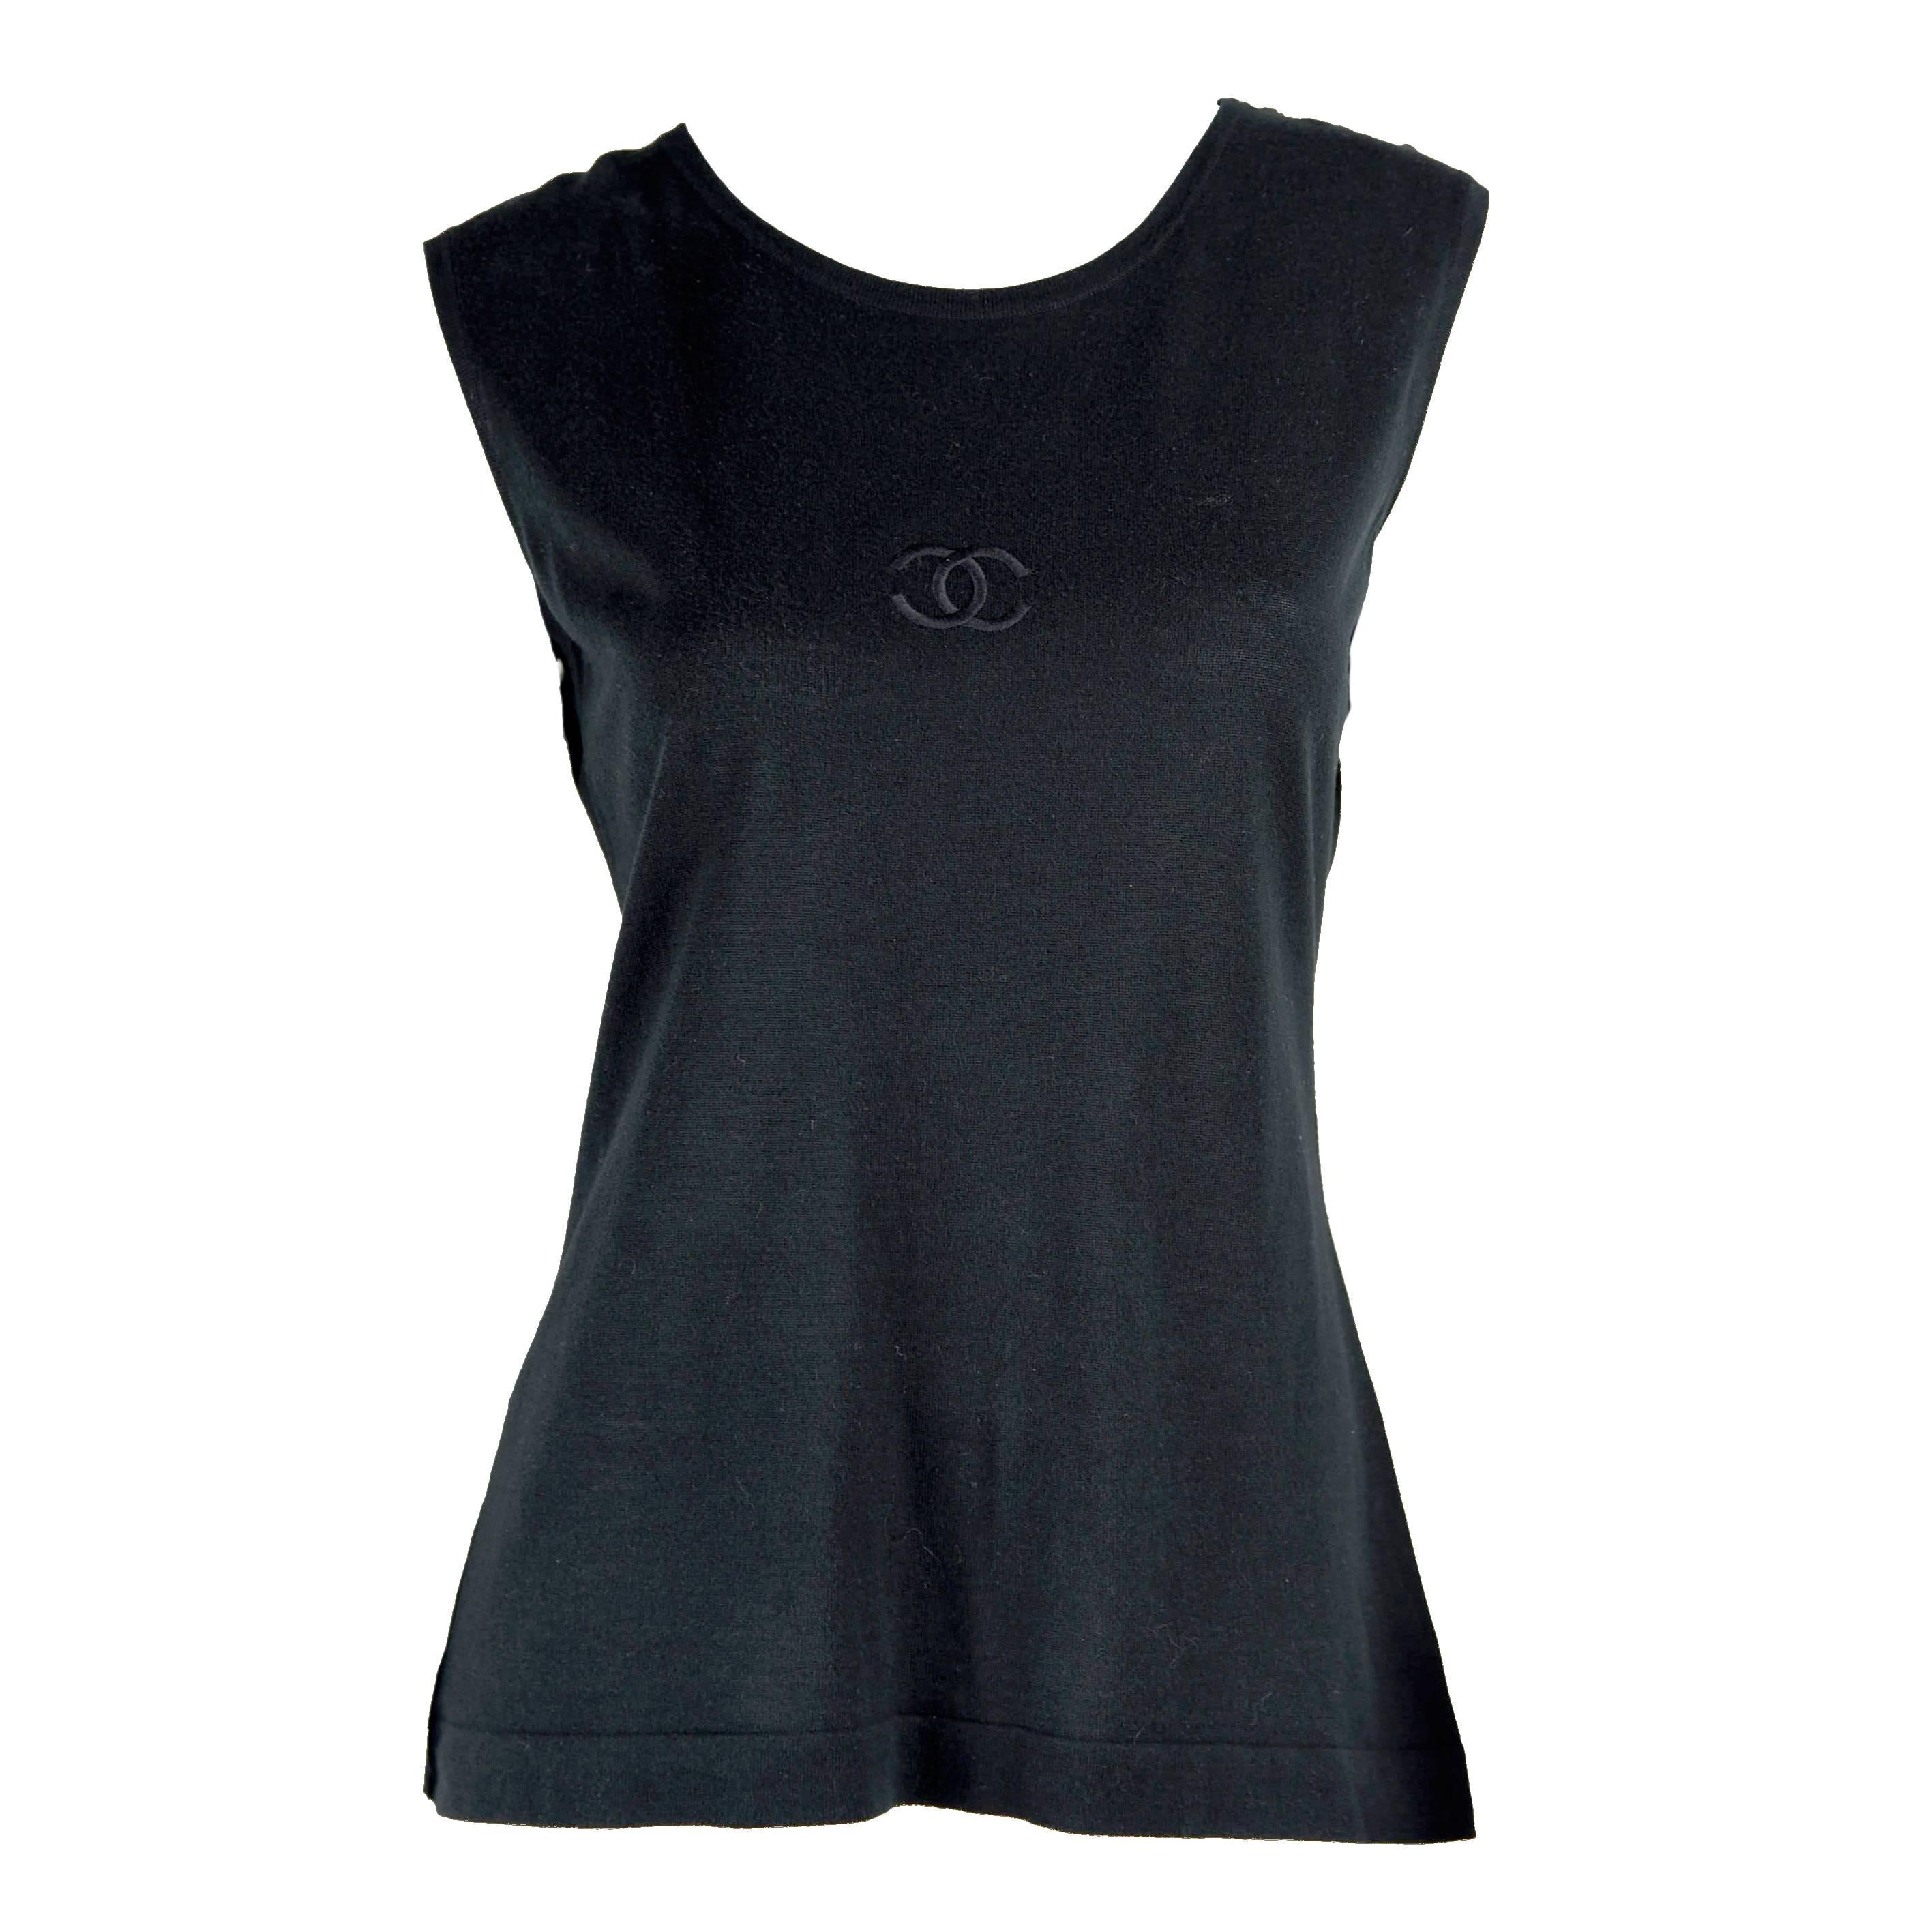 1980s Chanel Boutique Cotton Sleeveless Top with CC front and 4 gold CC Buttons For Sale